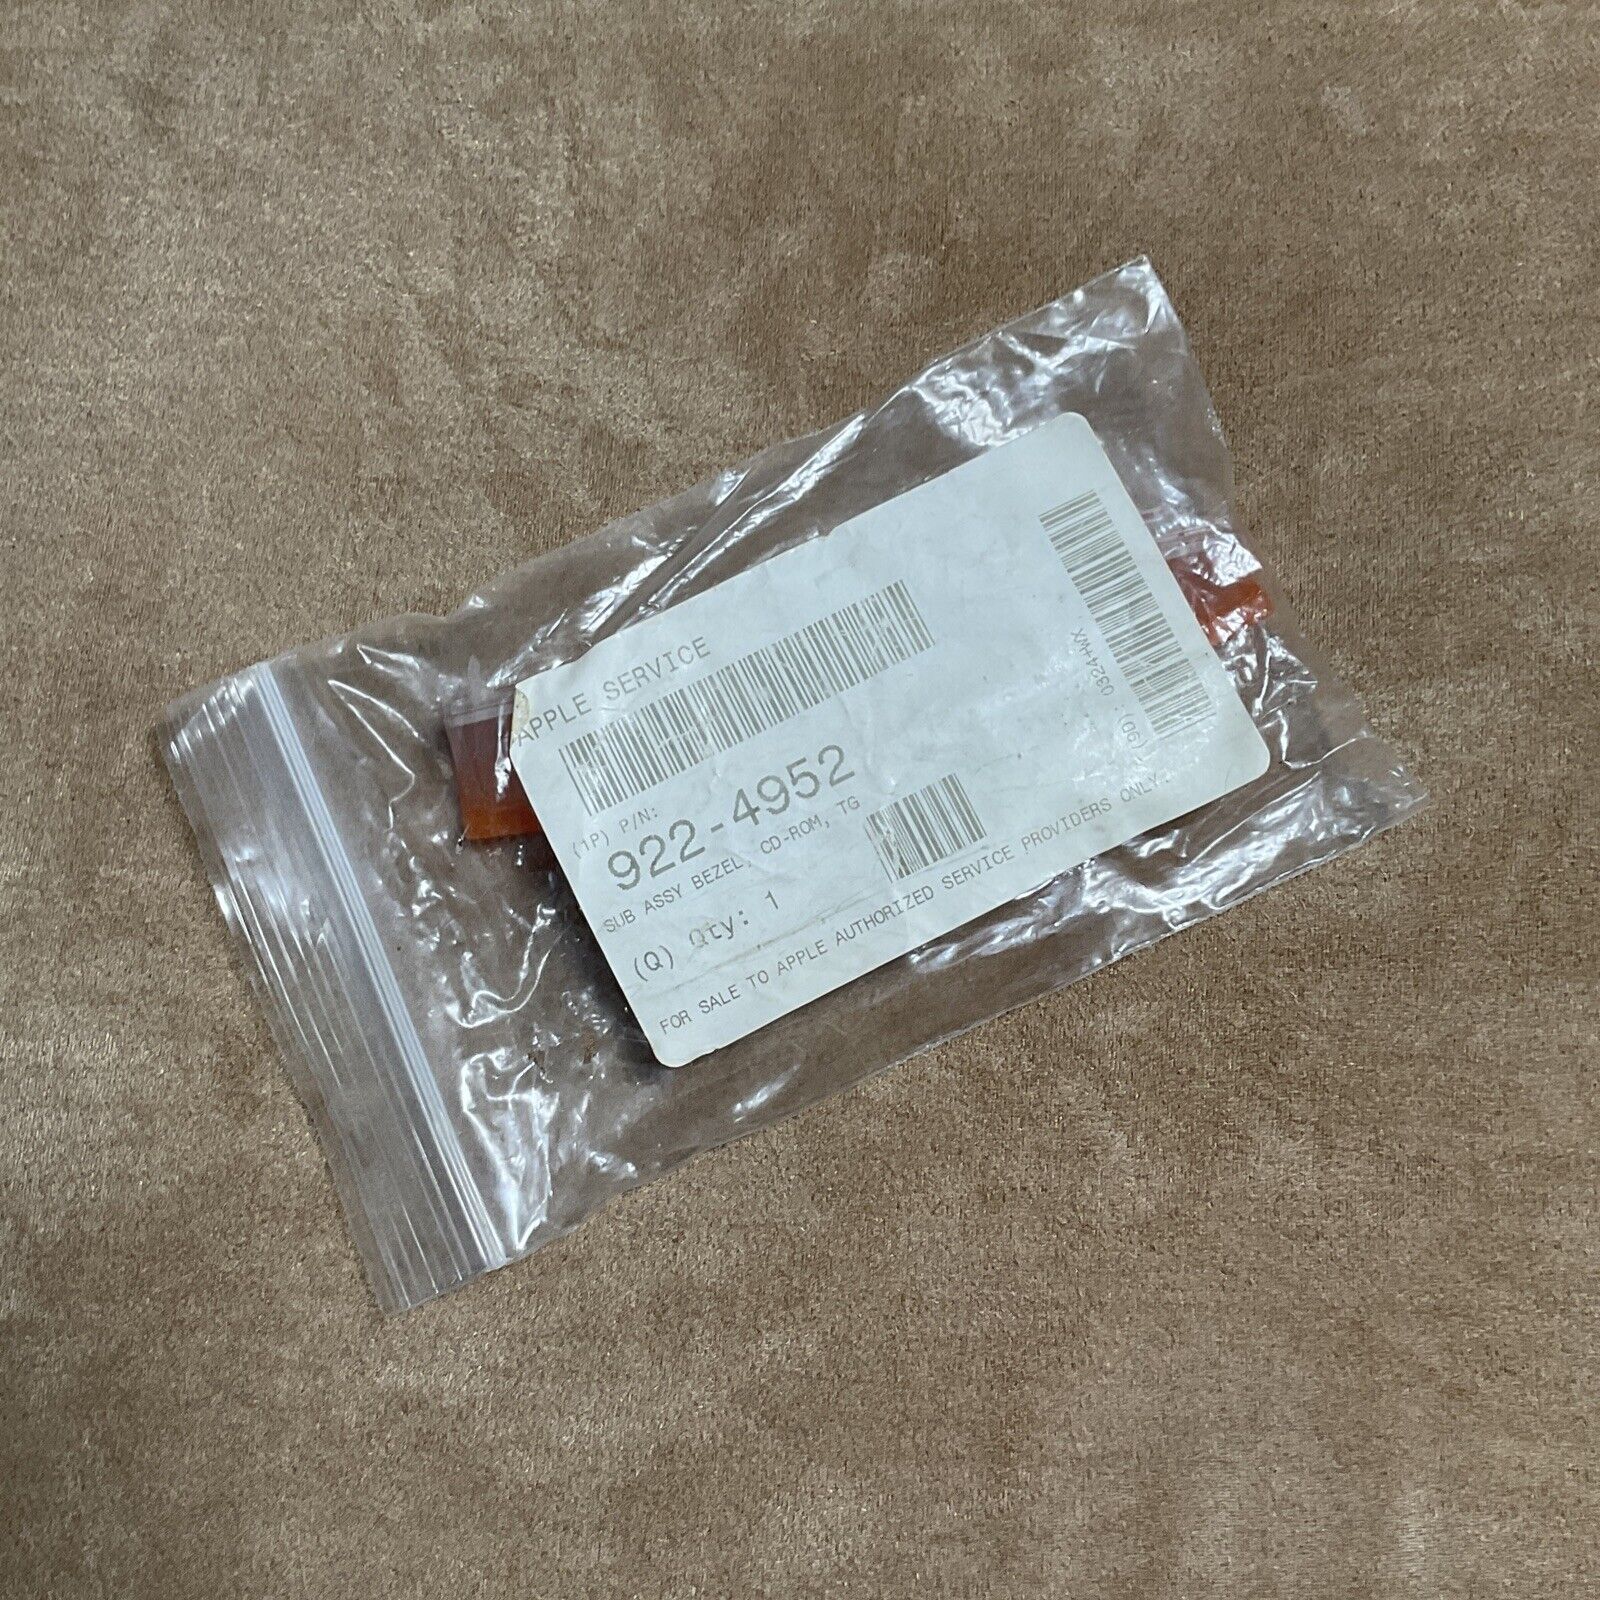 Apple iBook G3 Clamshell Tangerine OEM Drive Cover (NOS)